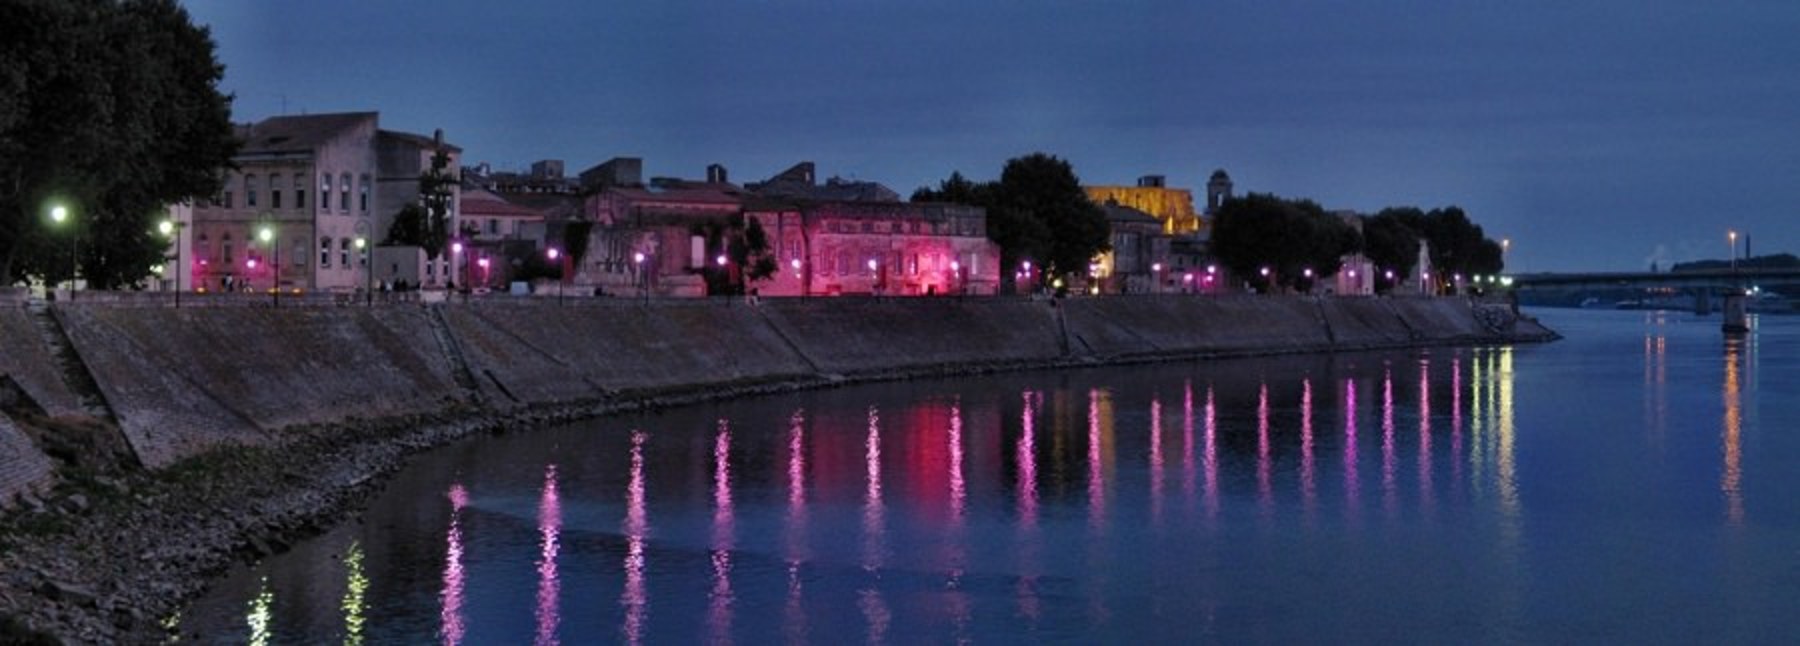 Content Image: Current view of Rhone in Night time. Fair Use